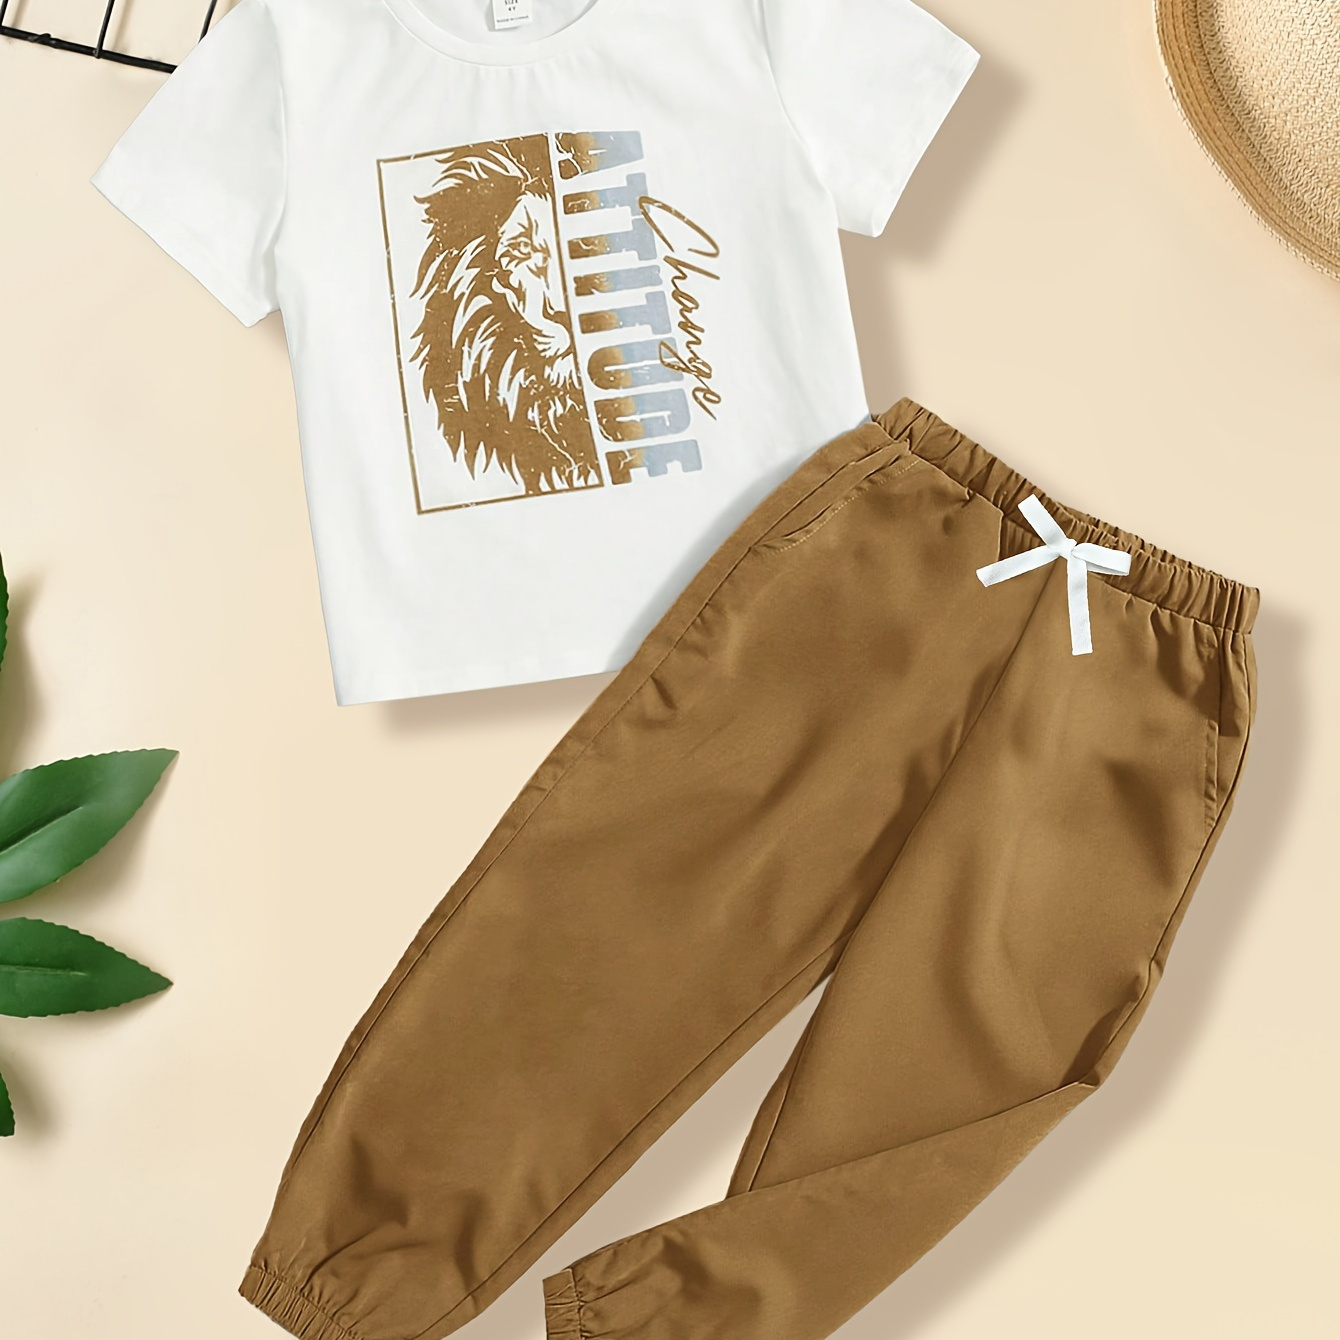 

White Cool Lion Cartoon With Alphabet Print Boys T-shirt And Brown Pants With Drawstring, Summer Outdoor Boys Clothes